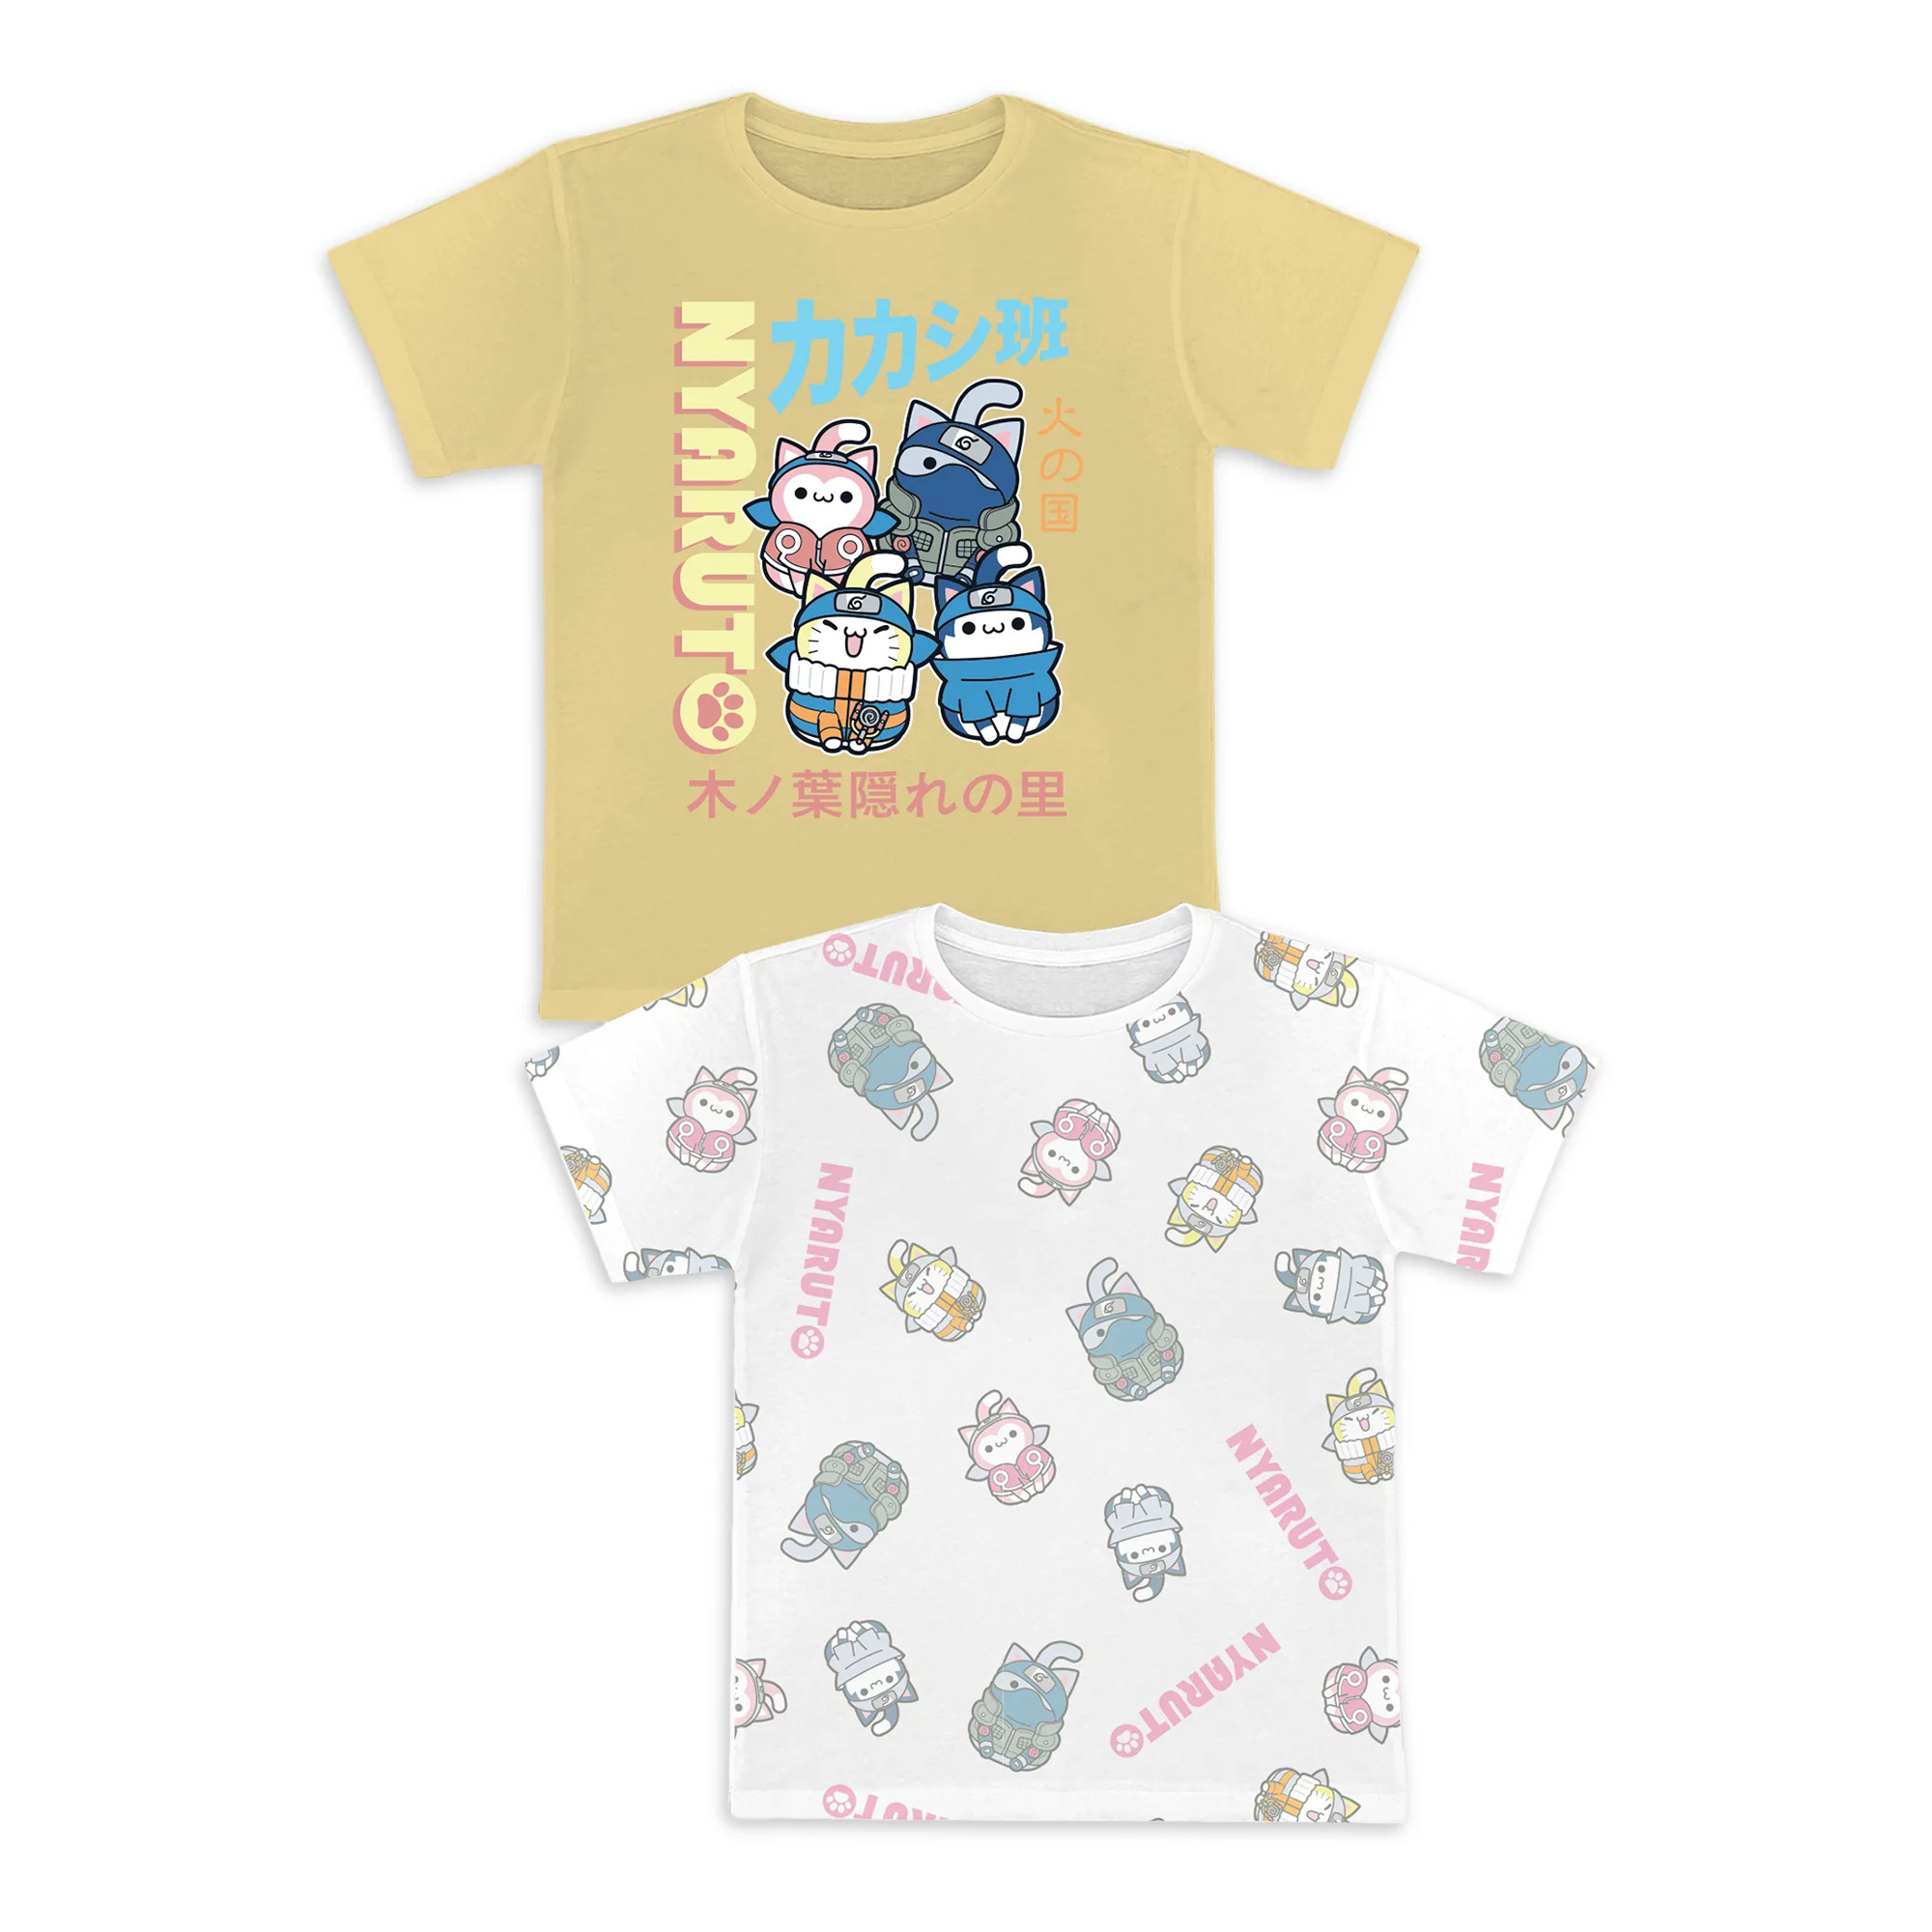 2-Piece Kids' Character Graphic T-Shirts: Peanuts, Naruto, Sonic, SpongeBob or Star Wars $5.50 ($2.25 each) & More + Free S&H w/ Walmart+ or $35+